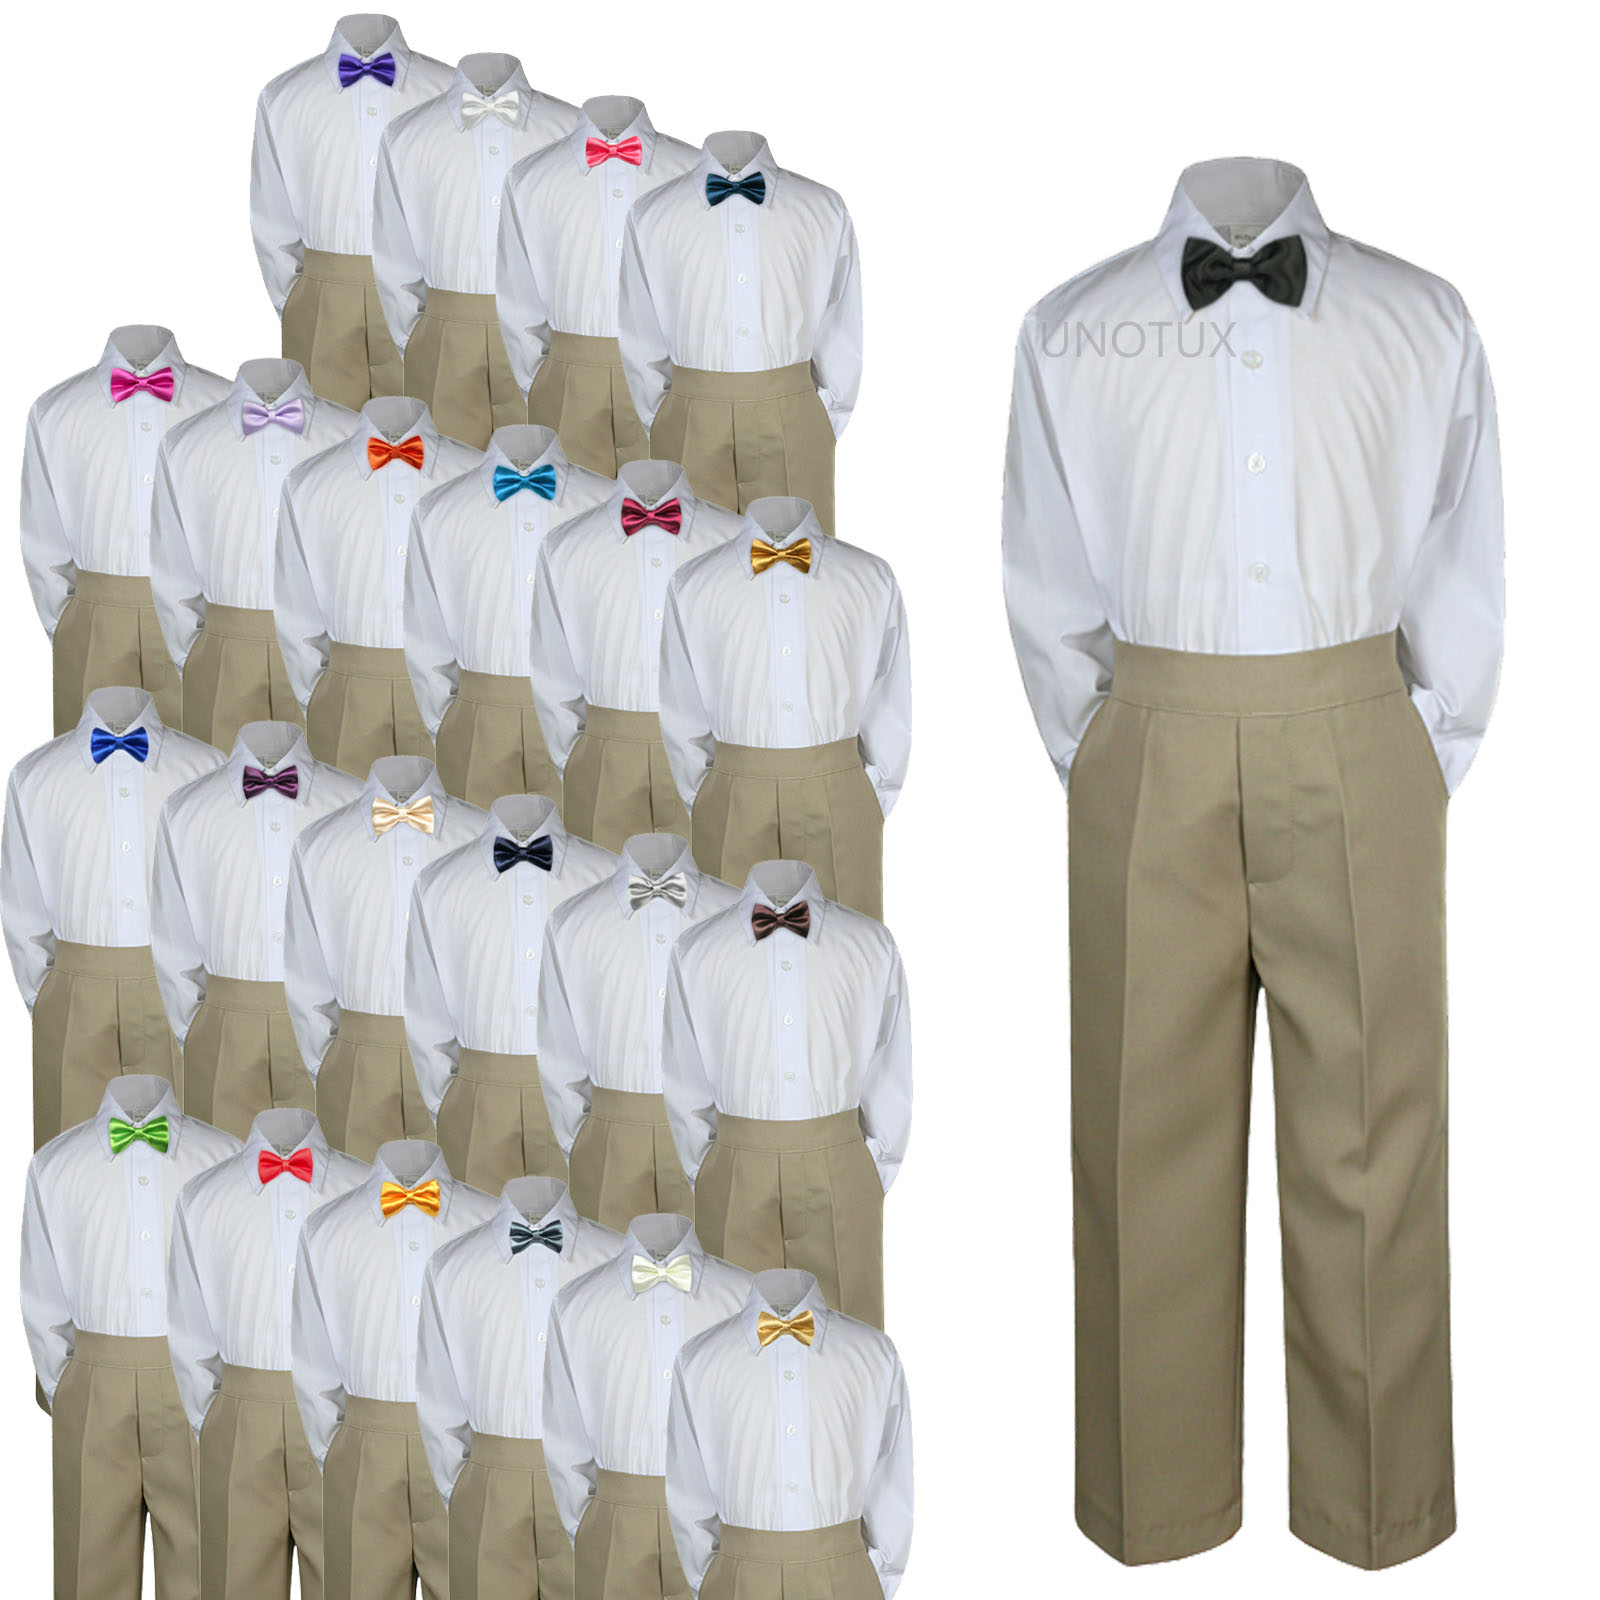 Leadertux 3pc S M L XL 2T 3T 4T Baby Toddler Boys Shirt Khaki Pants Suits Separate Tuxedo Formal Wedding Party Outfits Extra Bow